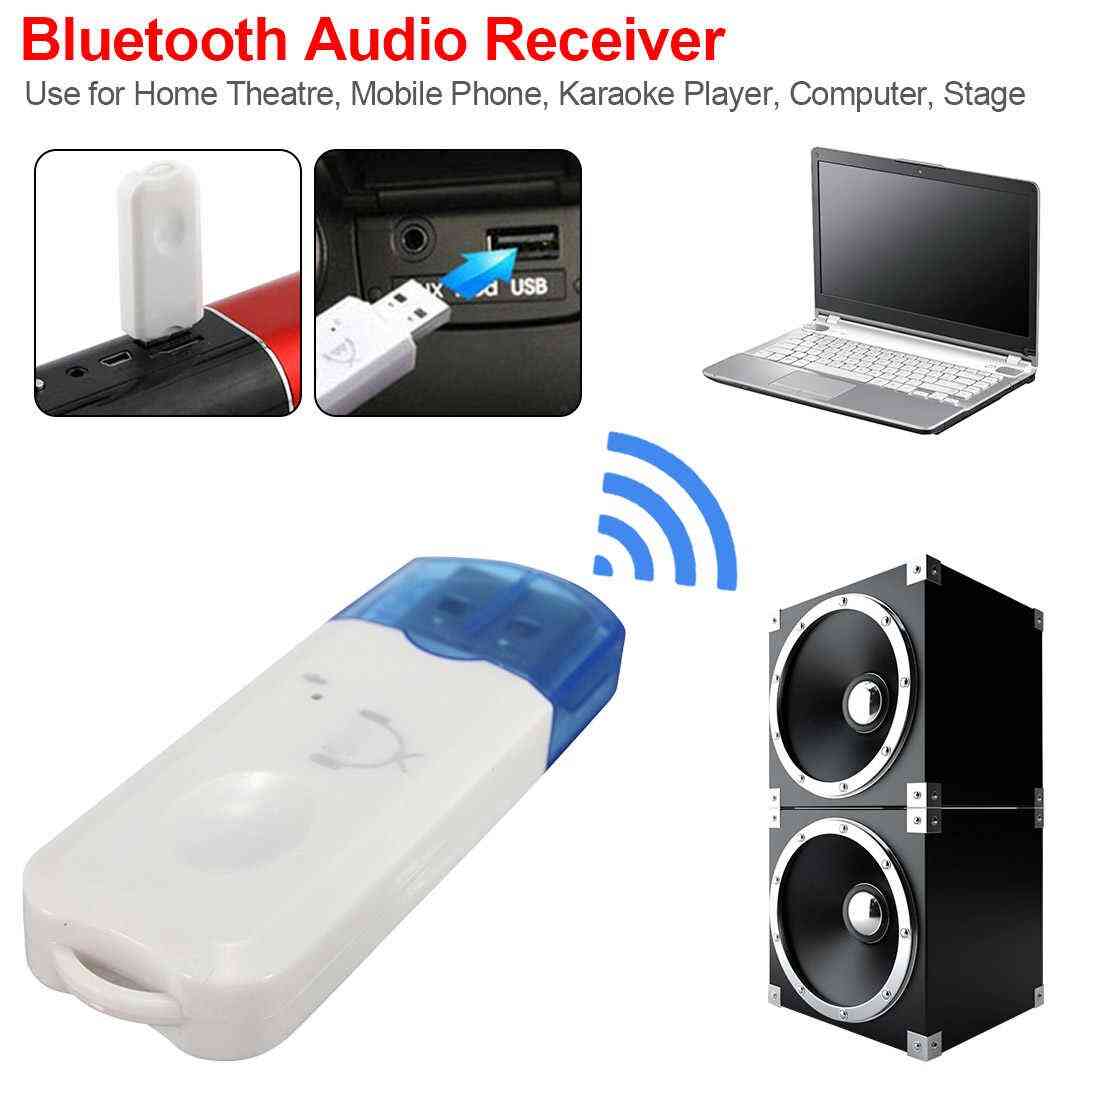 Bluetooth V2.1 Adapter USB Dongle for Computer PC Wireless Mouse Bluetooth Speaker 2.1 Music Receiver USB Bluetooth Adapter